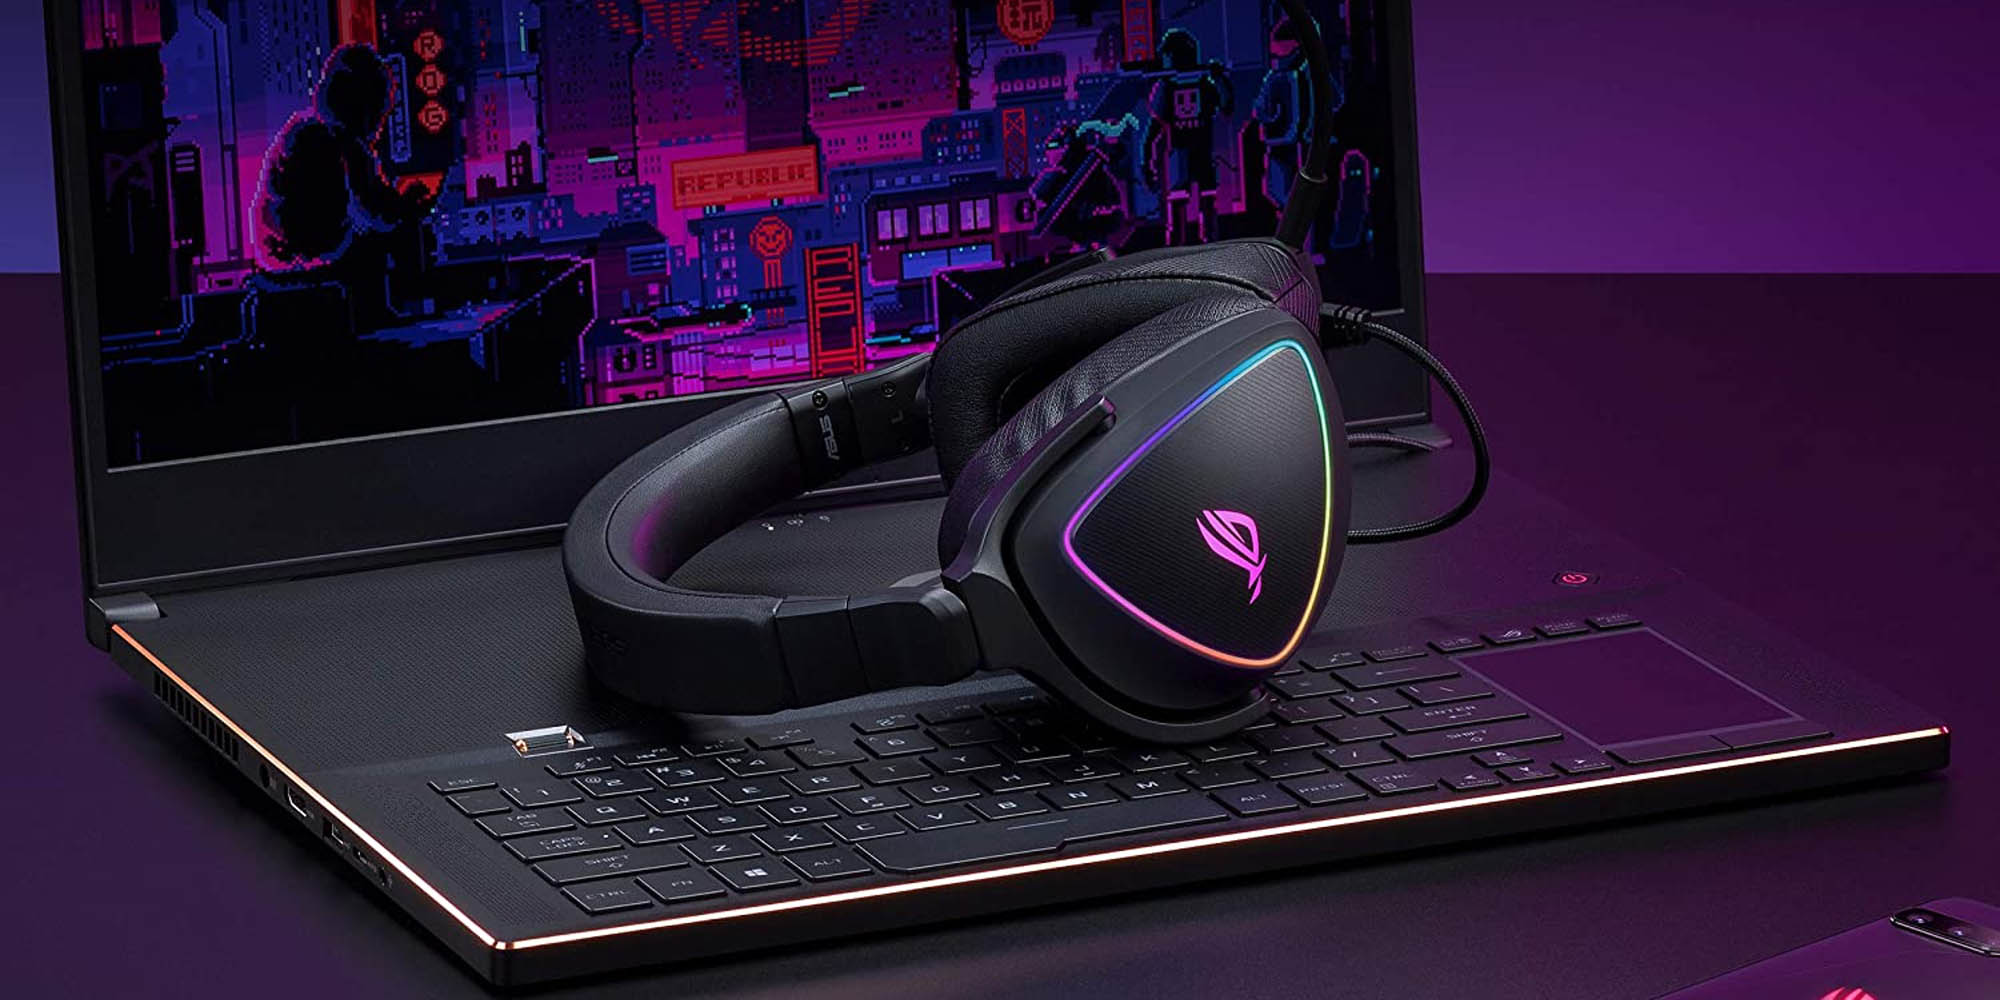 ASUS ROG Delta Core 3.5mm Wired Gaming Headset; Controls on Ear